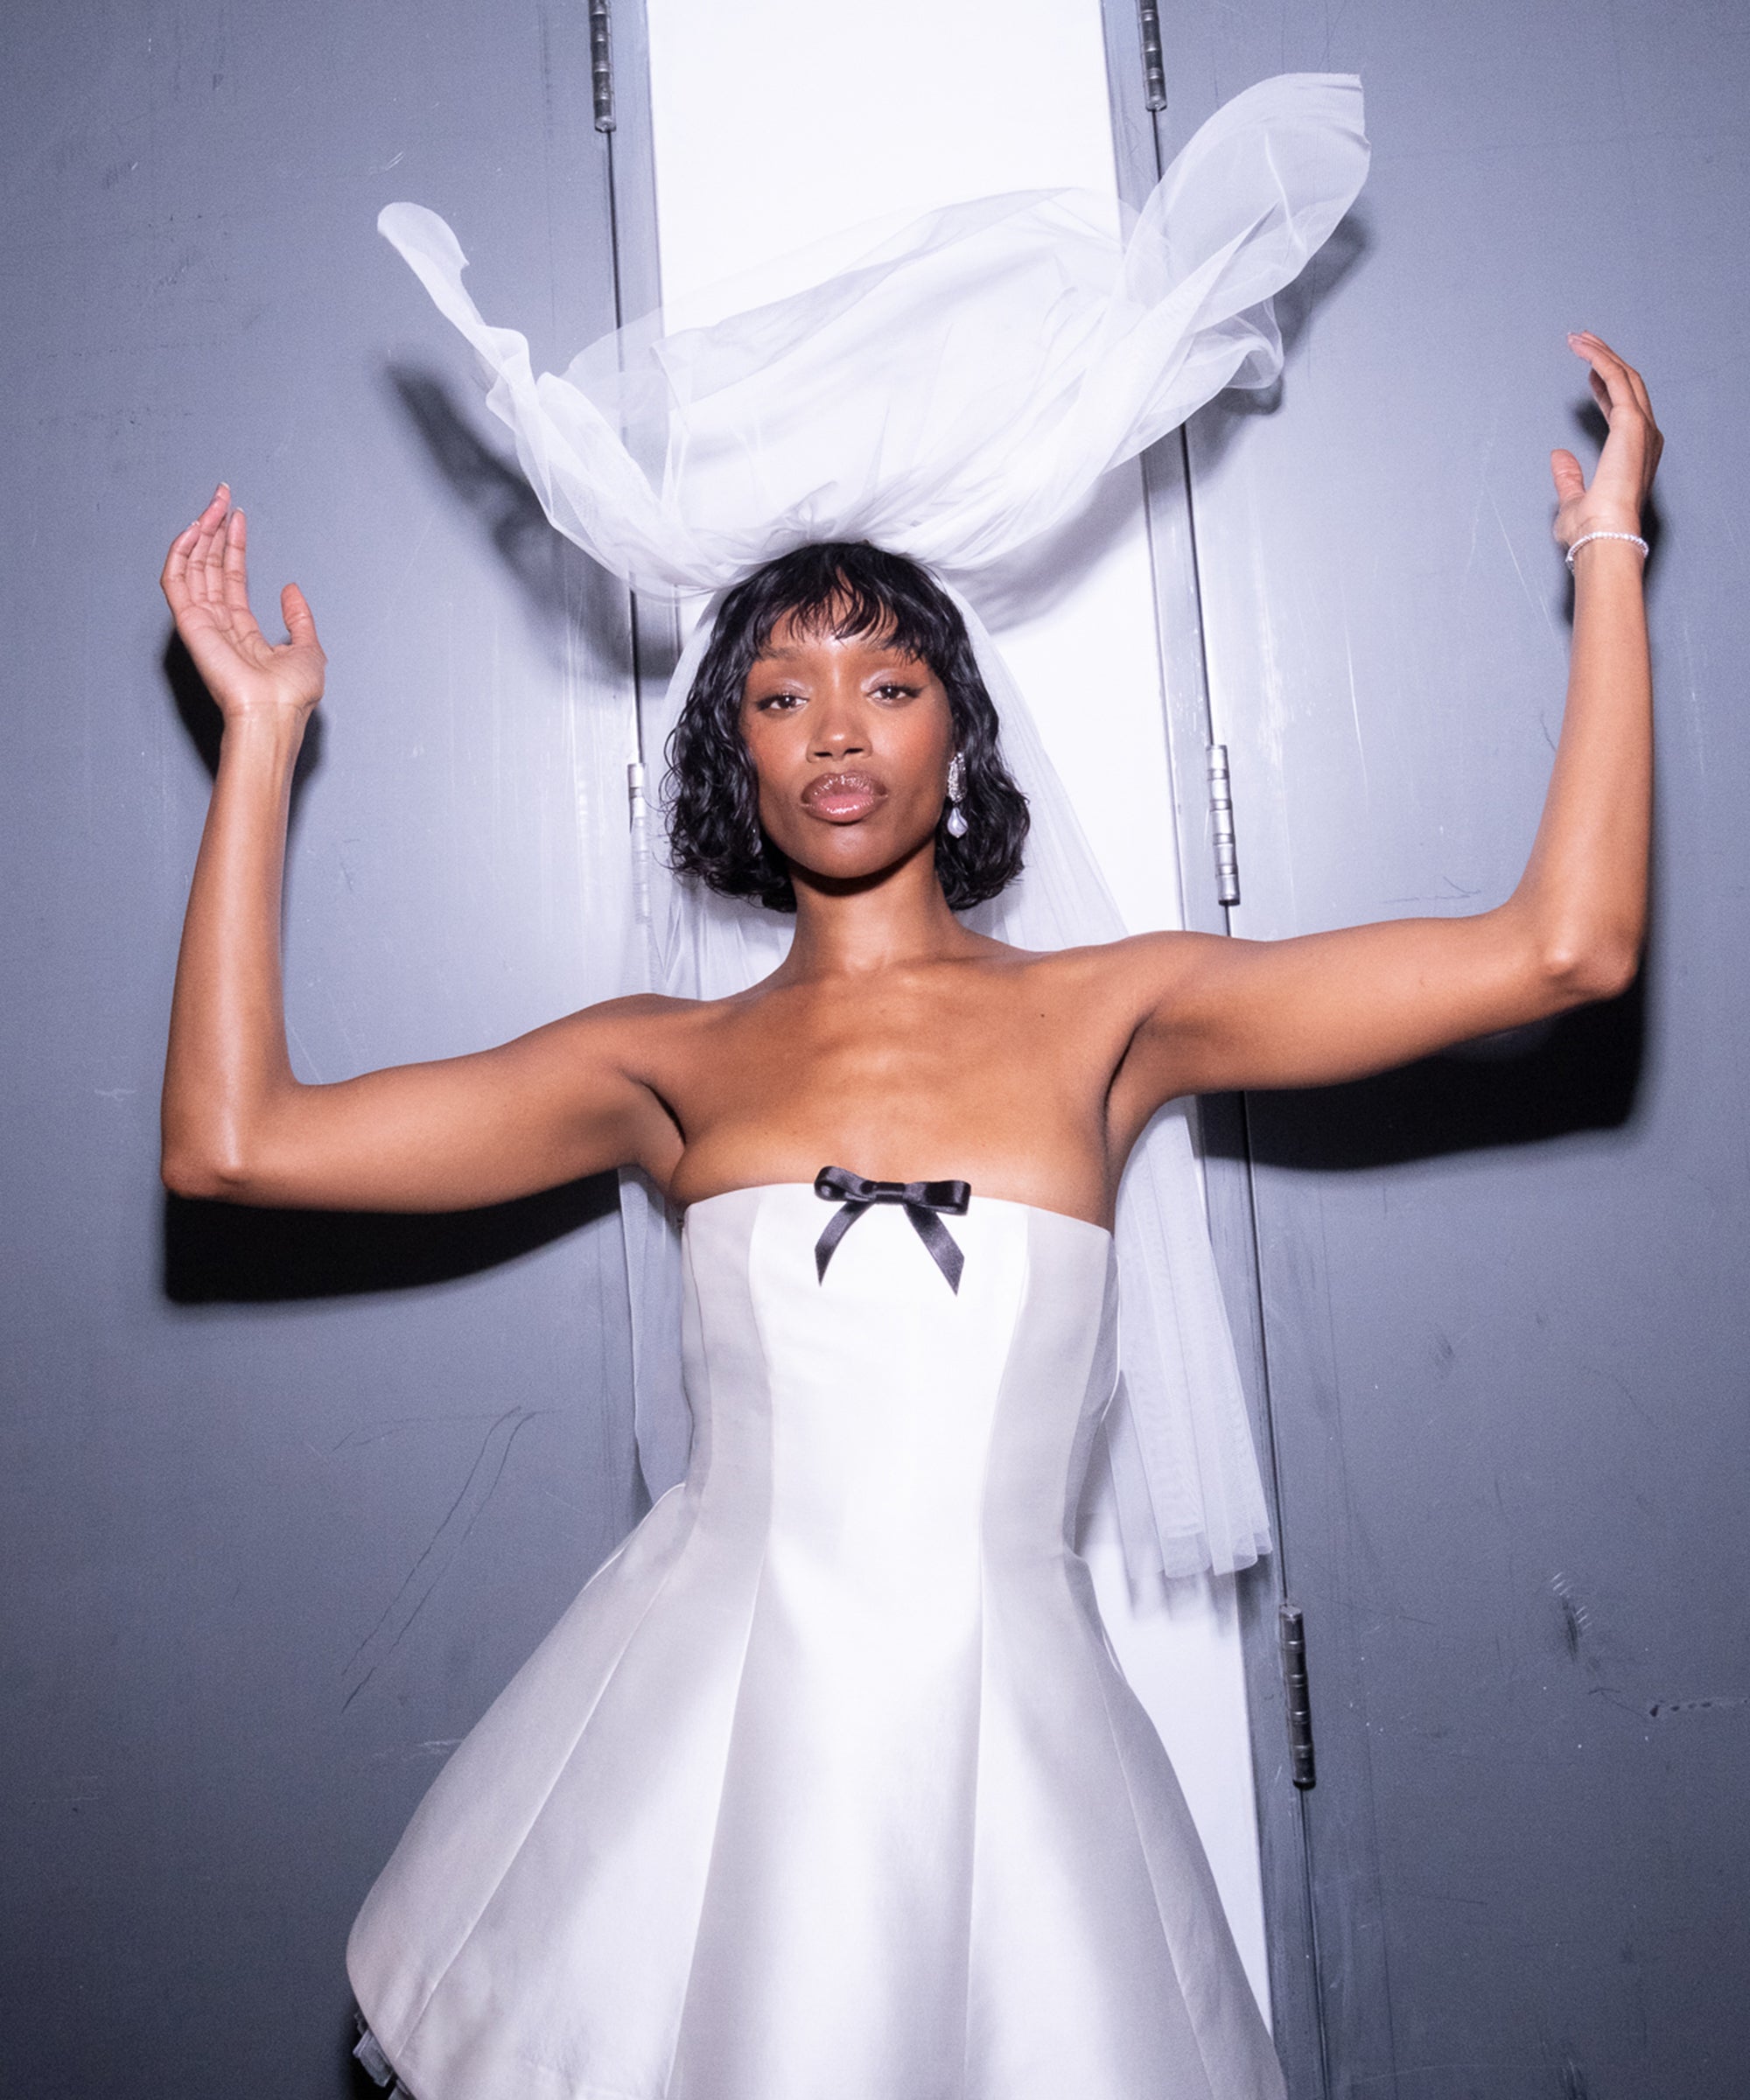 Ssense’s New Bridal Collection Features Non-Traditional Dresses & Accessories